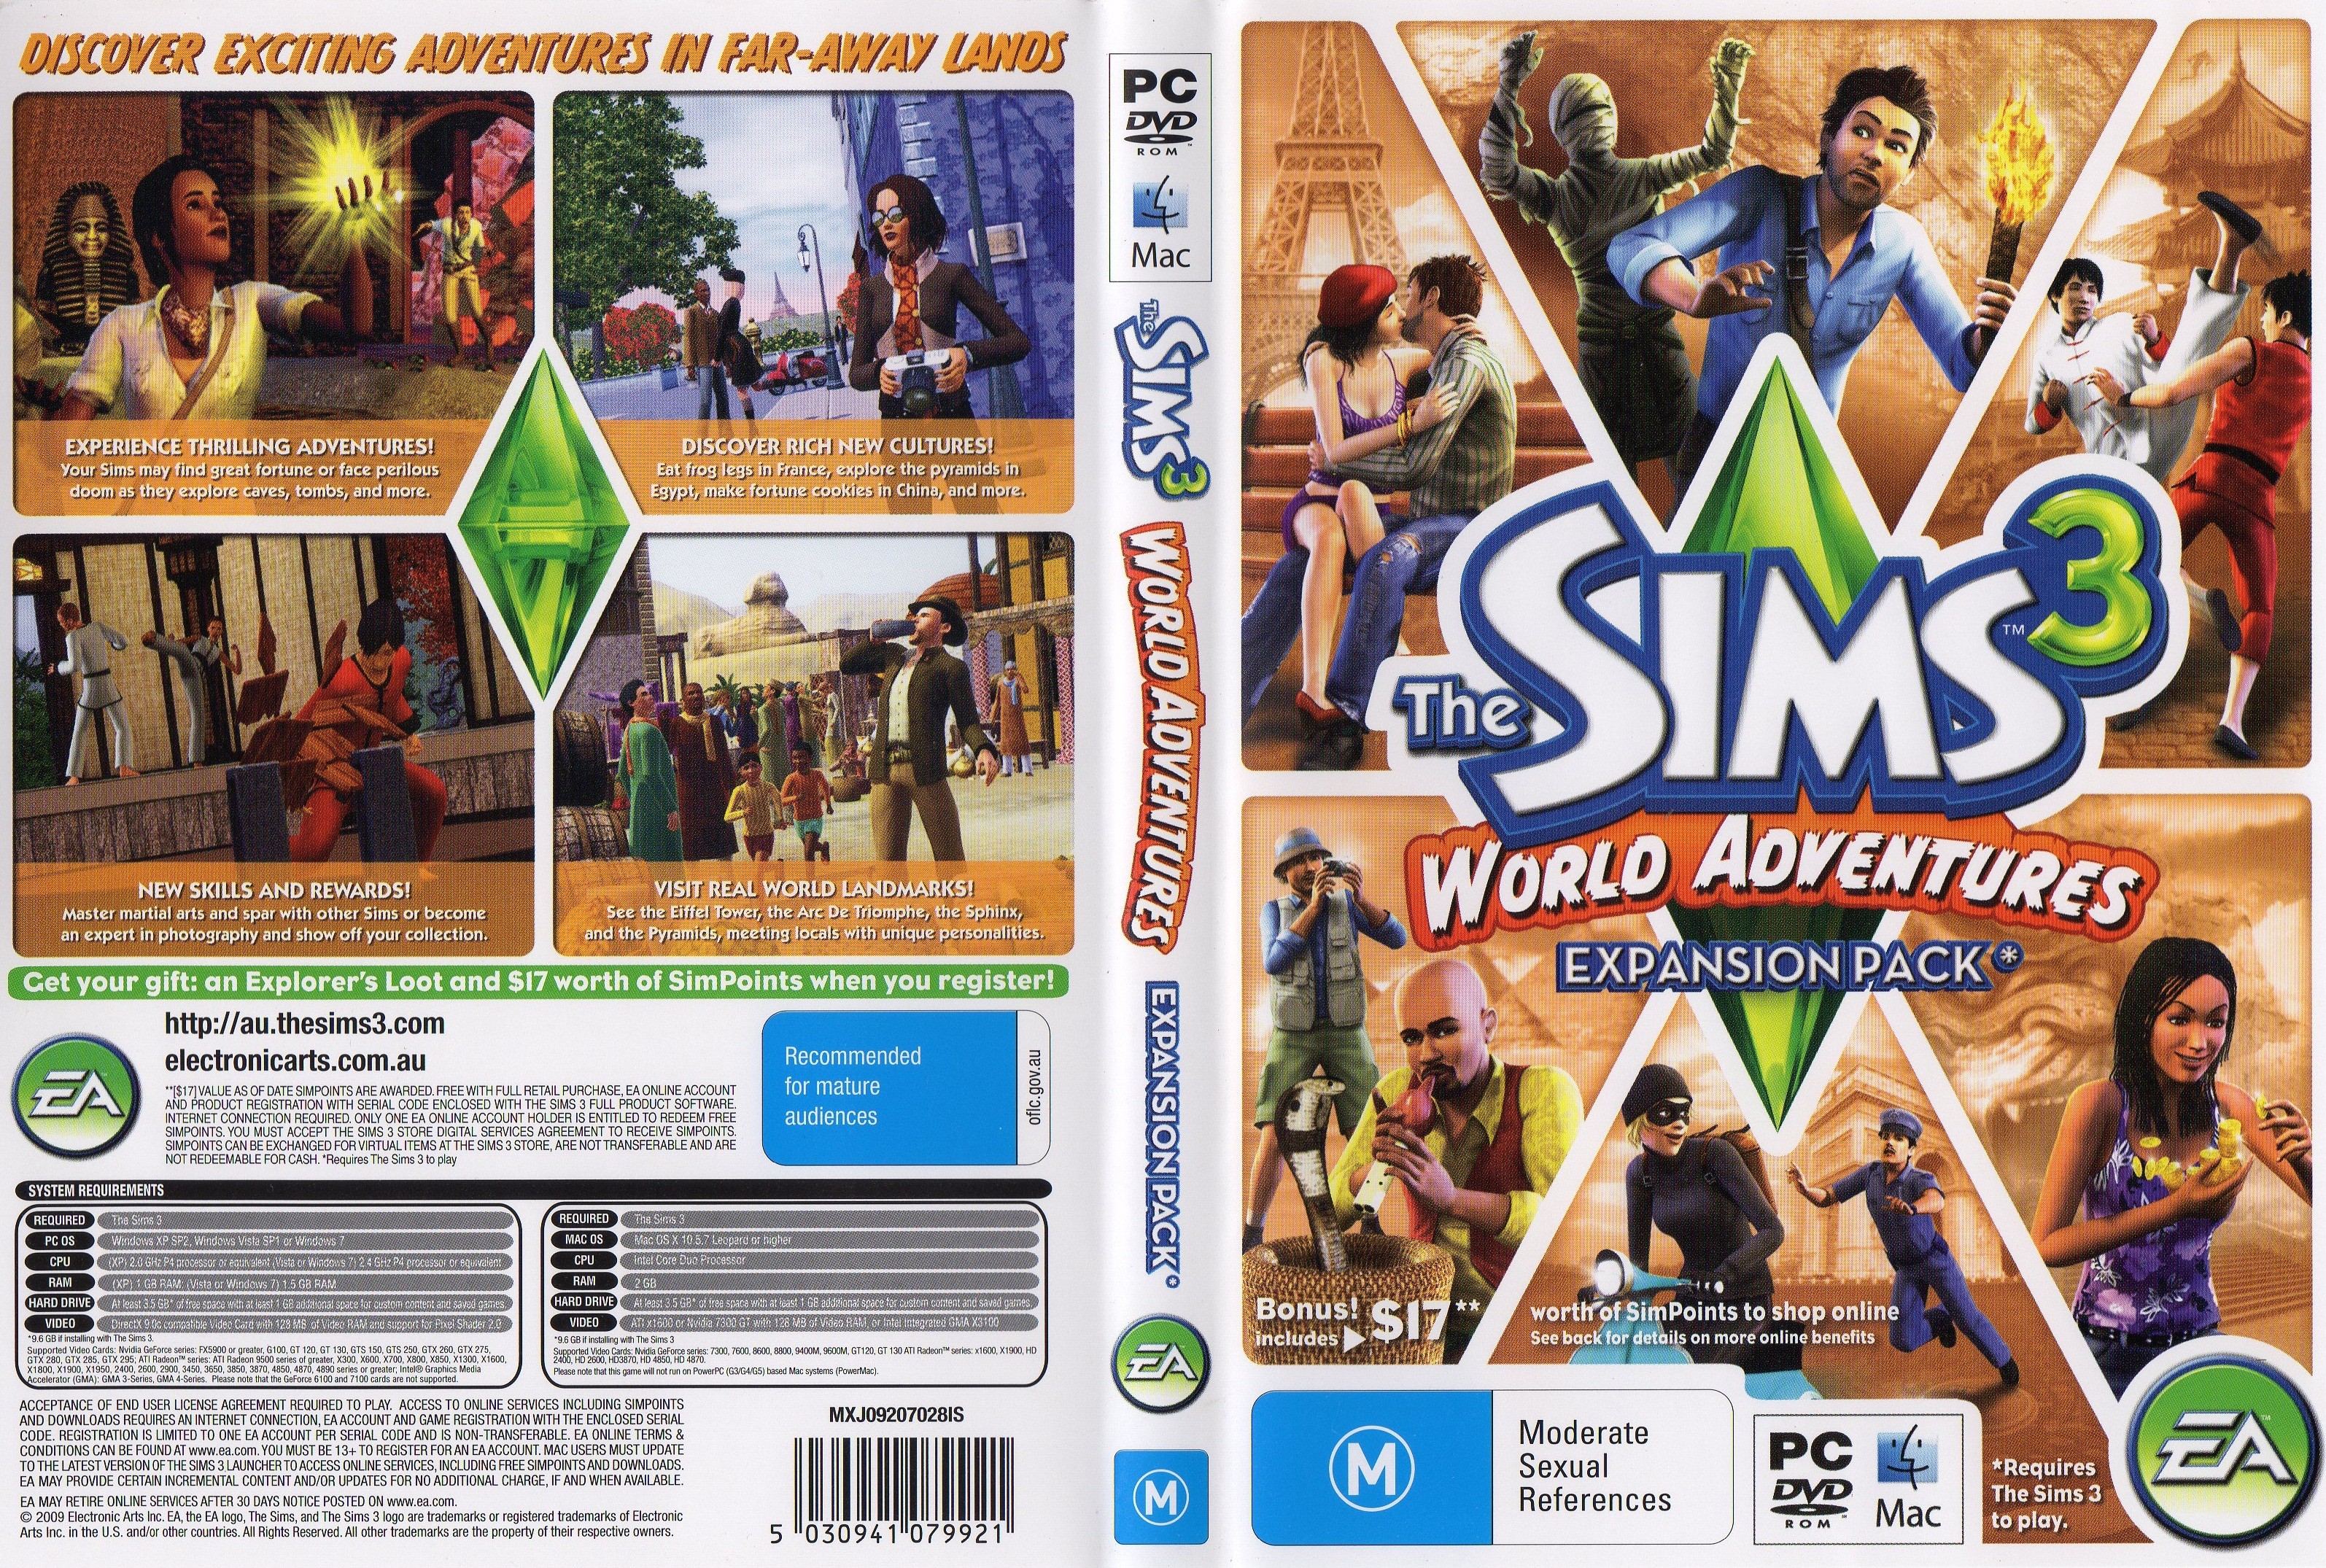 The Sims World Adventures Free